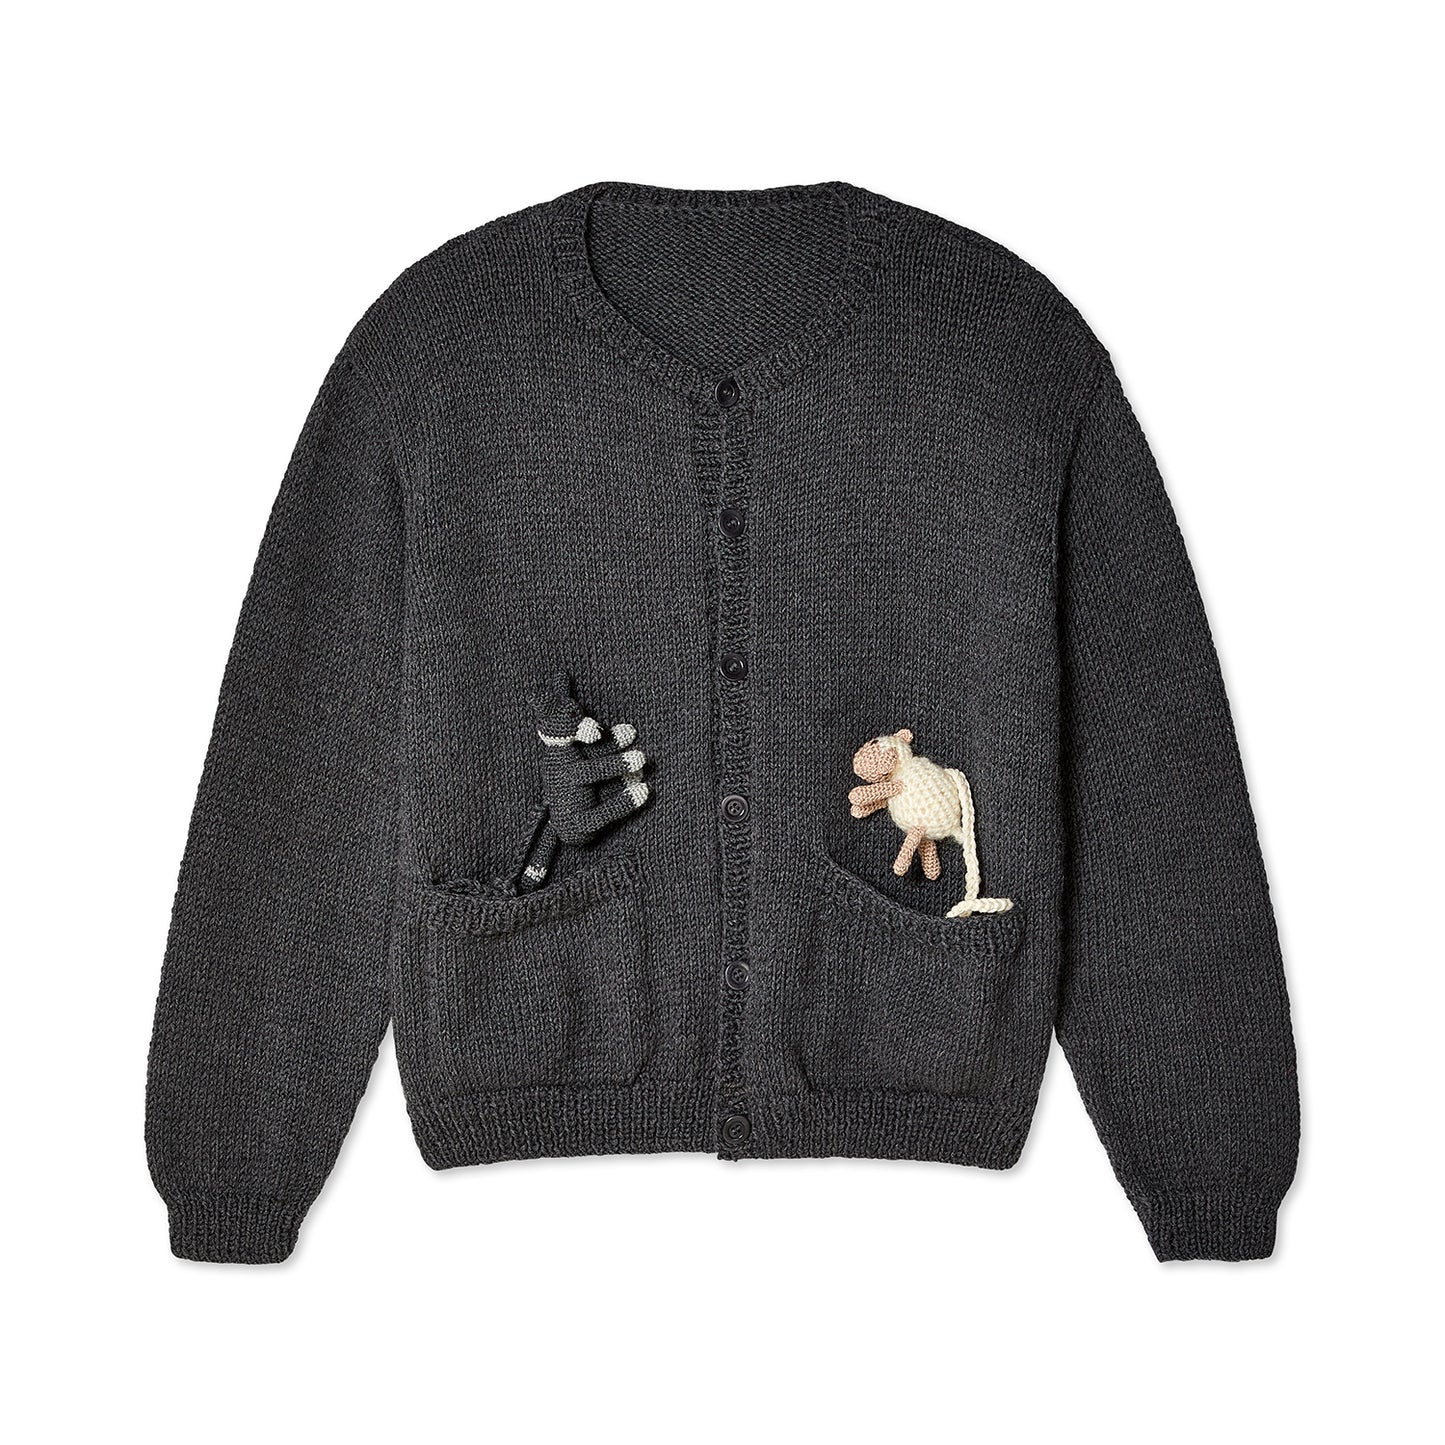 WOLF CARDIGAN WITH STUFFIES KNIT